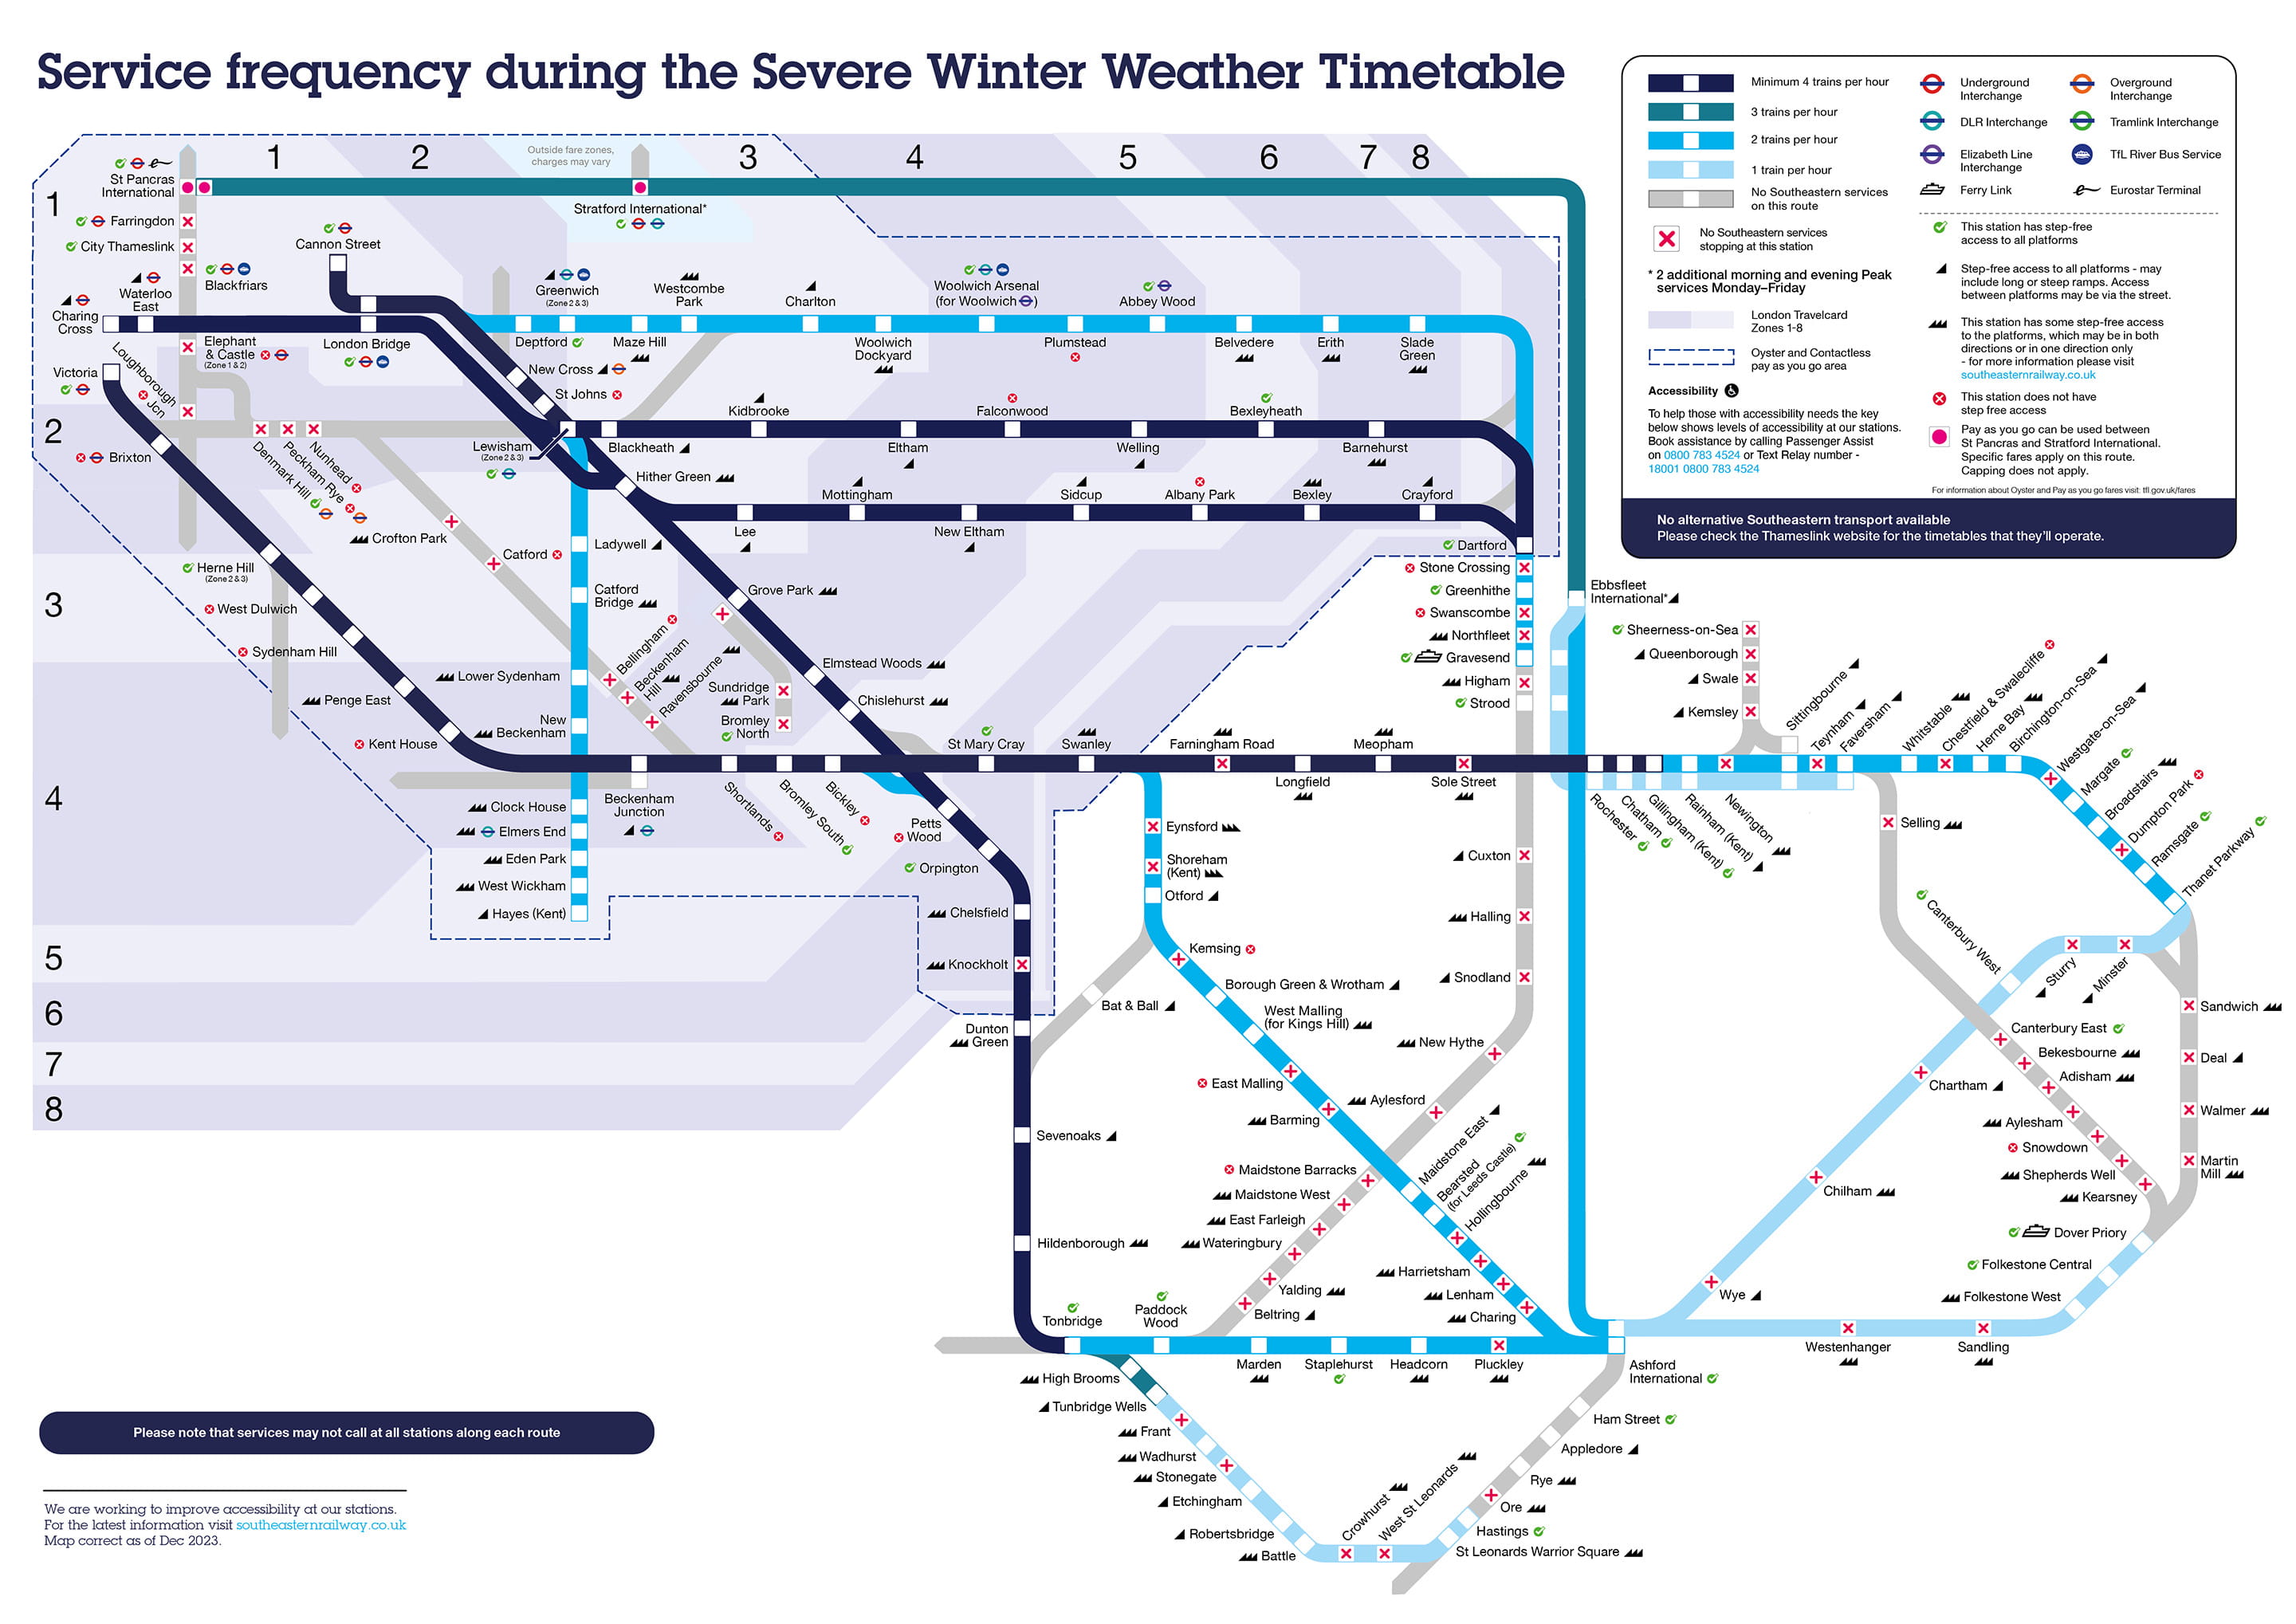 Service frequency during the Severe Winter Weather Timetable